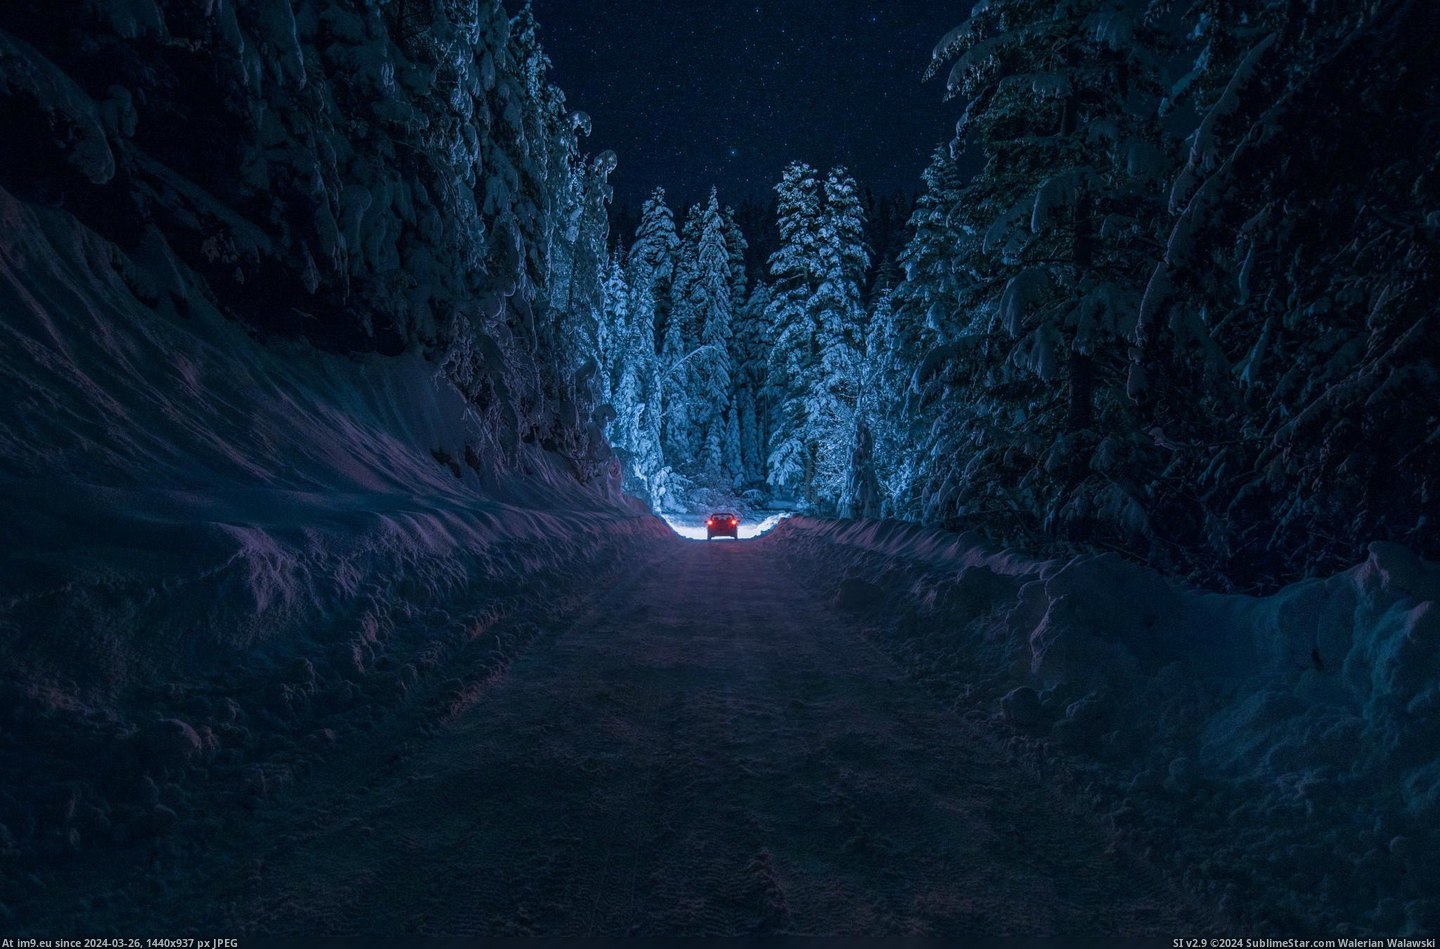 #Forest #Snowy #Peaceful #Driving [Pics] Driving through a very peaceful snowy forest. Pic. (Obraz z album My r/PICS favs))